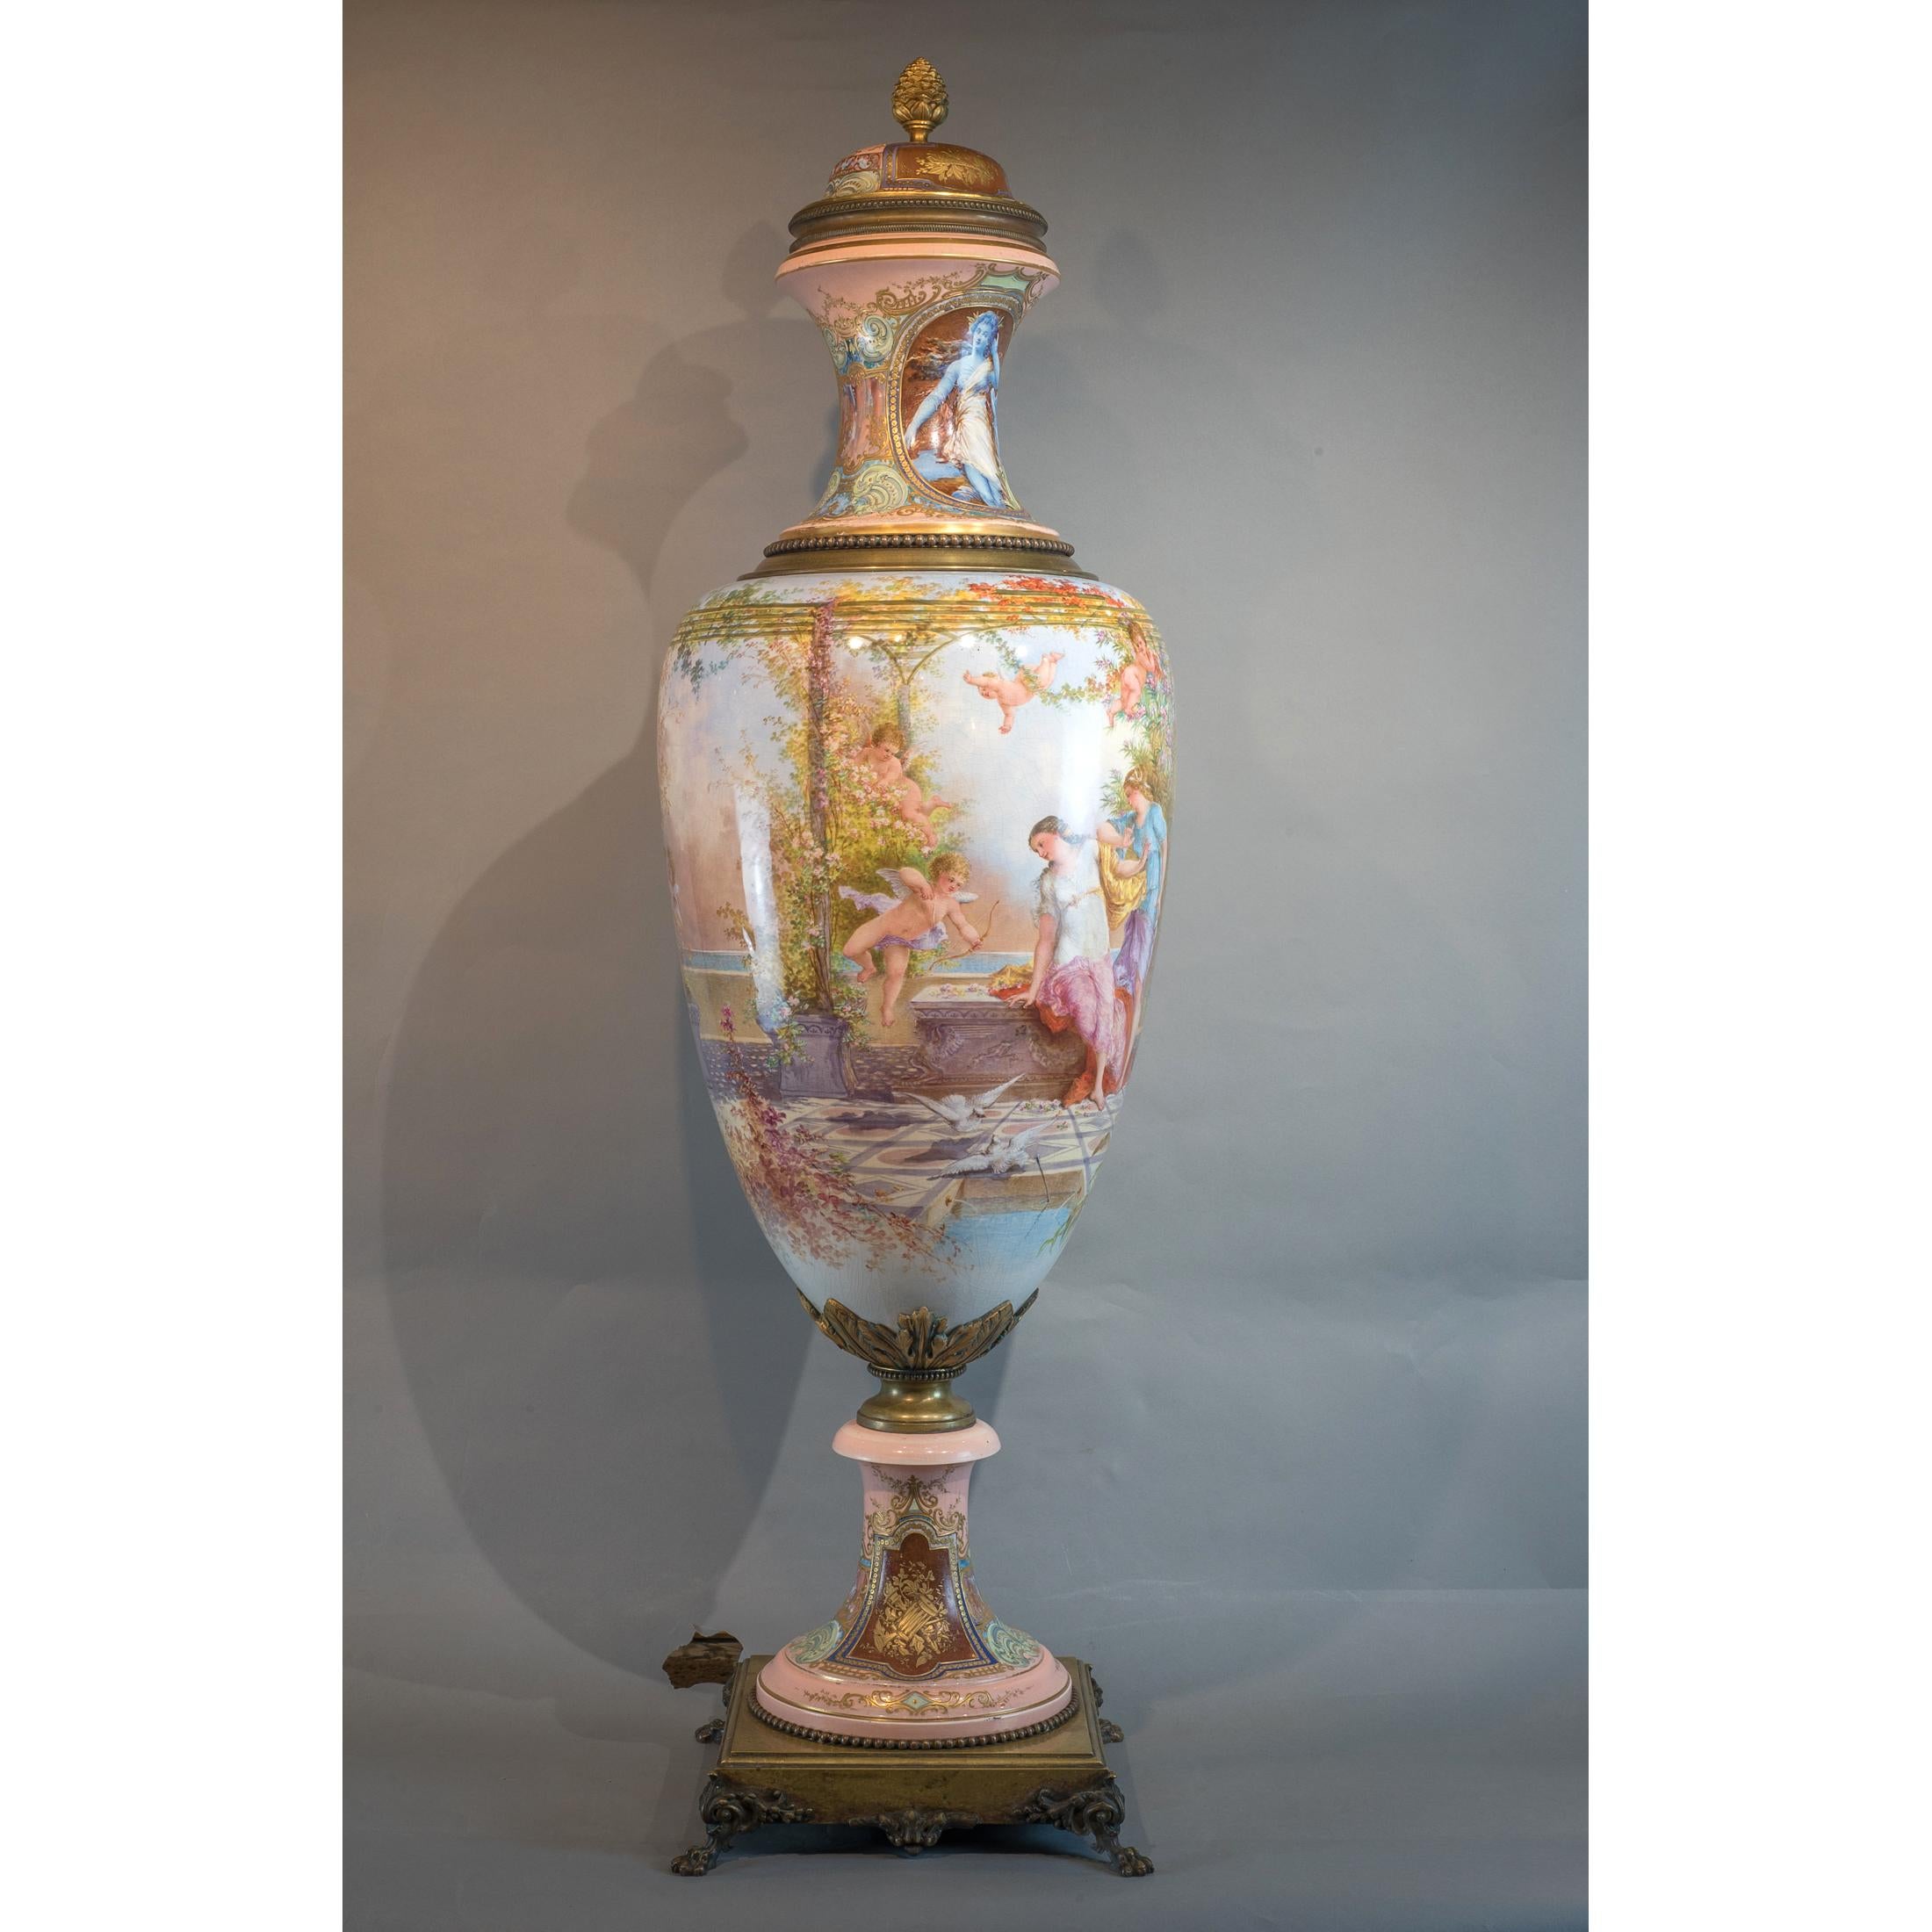  Pair of Monumental Sèvres and Gilt Bronze-Mounted Vase by Fuchs In Good Condition For Sale In New York, NY